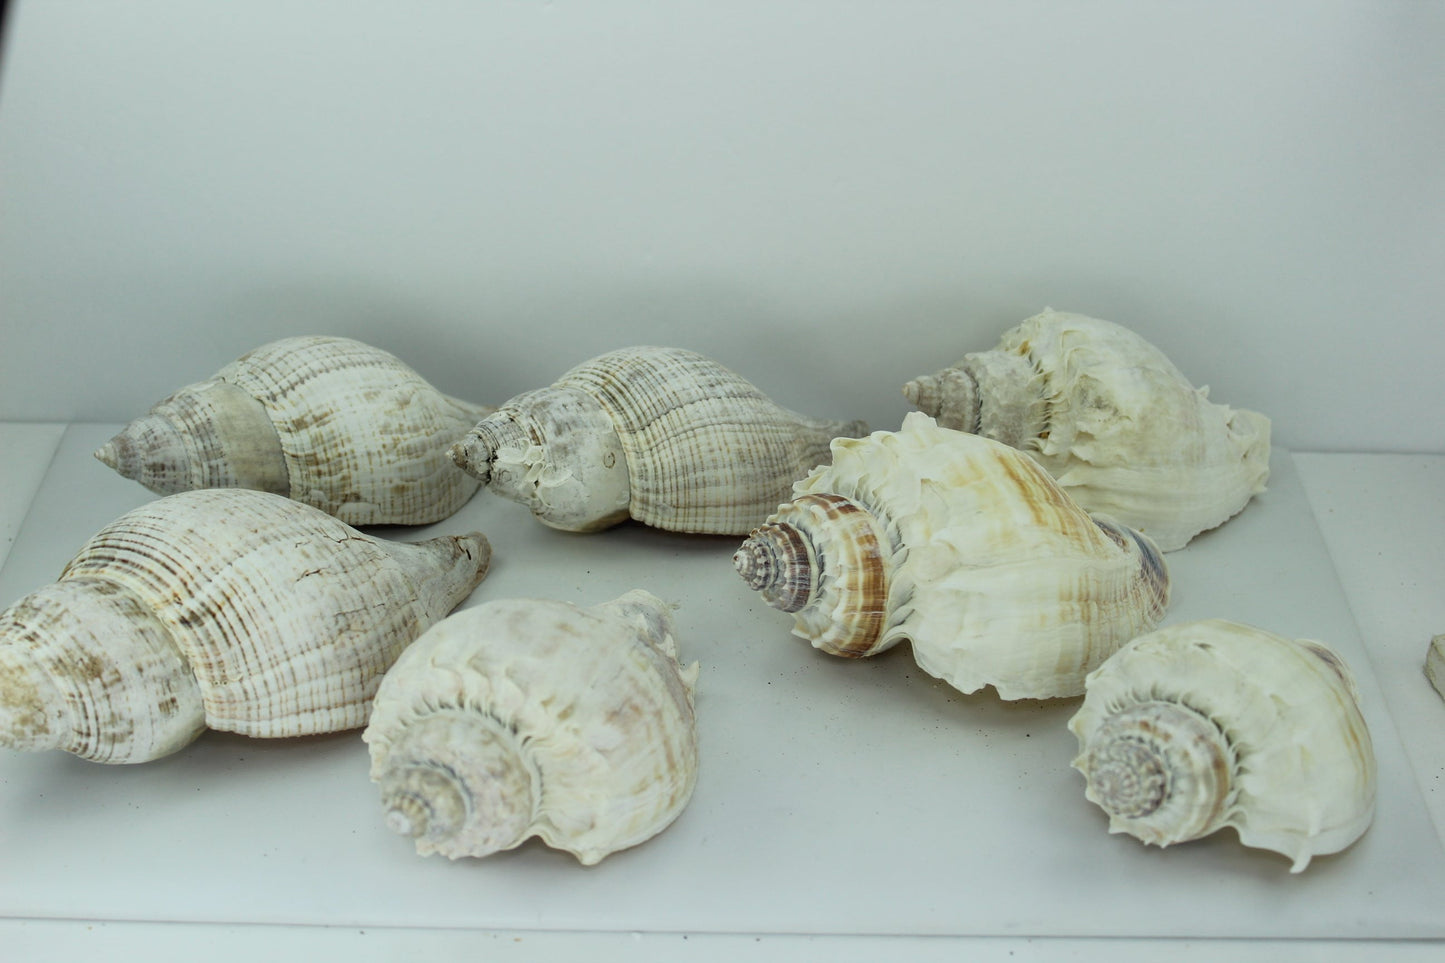 Florida King Crown Conch Shells 7 Large 4" 5 1/2" Vintage Estate Collection Shell Art Wreaths Mirrors Decor mother nature